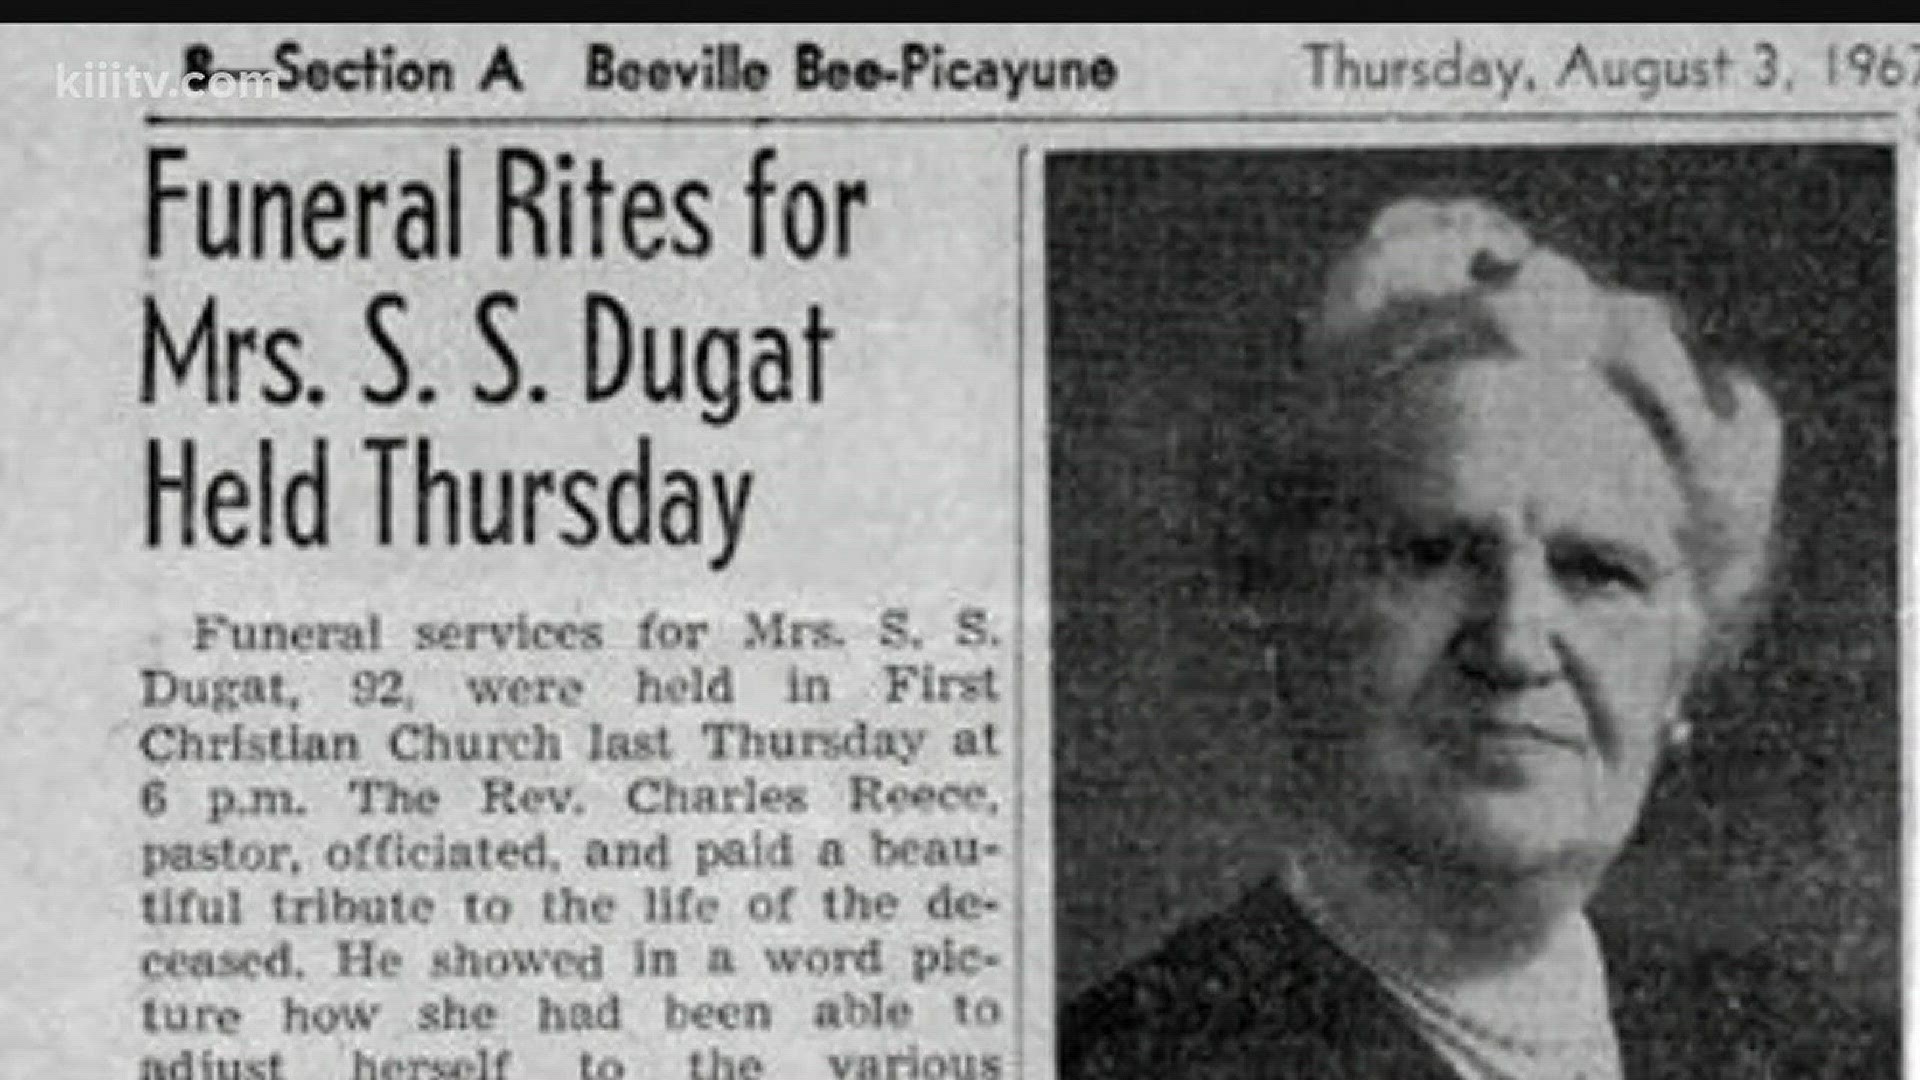 It was back in 1901 when Dugat arrived in Beeville and heard that a photography studio was for sale, so she decided to buy it and set up shop.